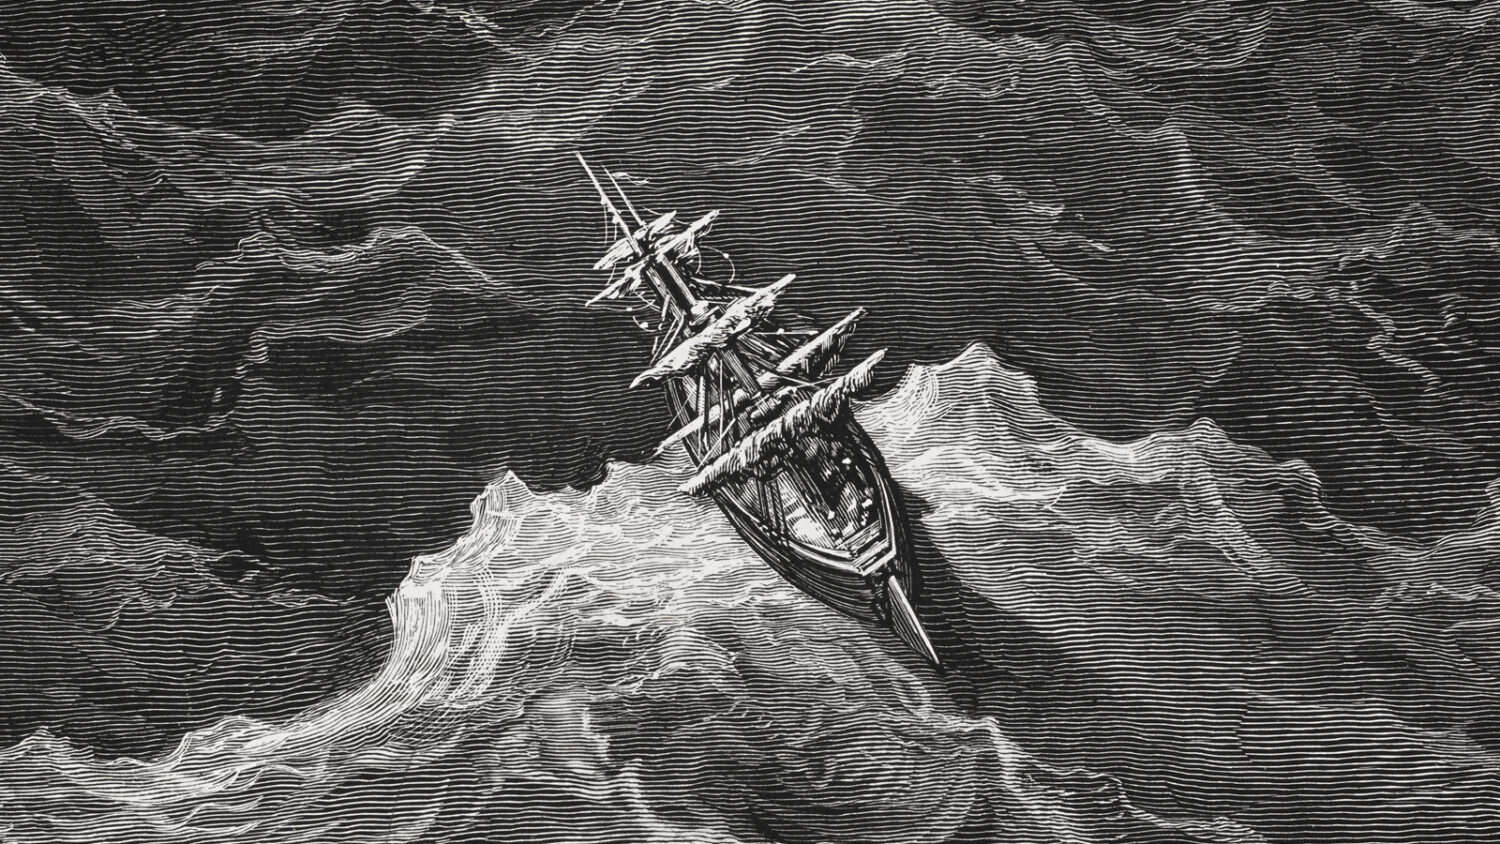 MaritimeQuest - The Ancient Mariner